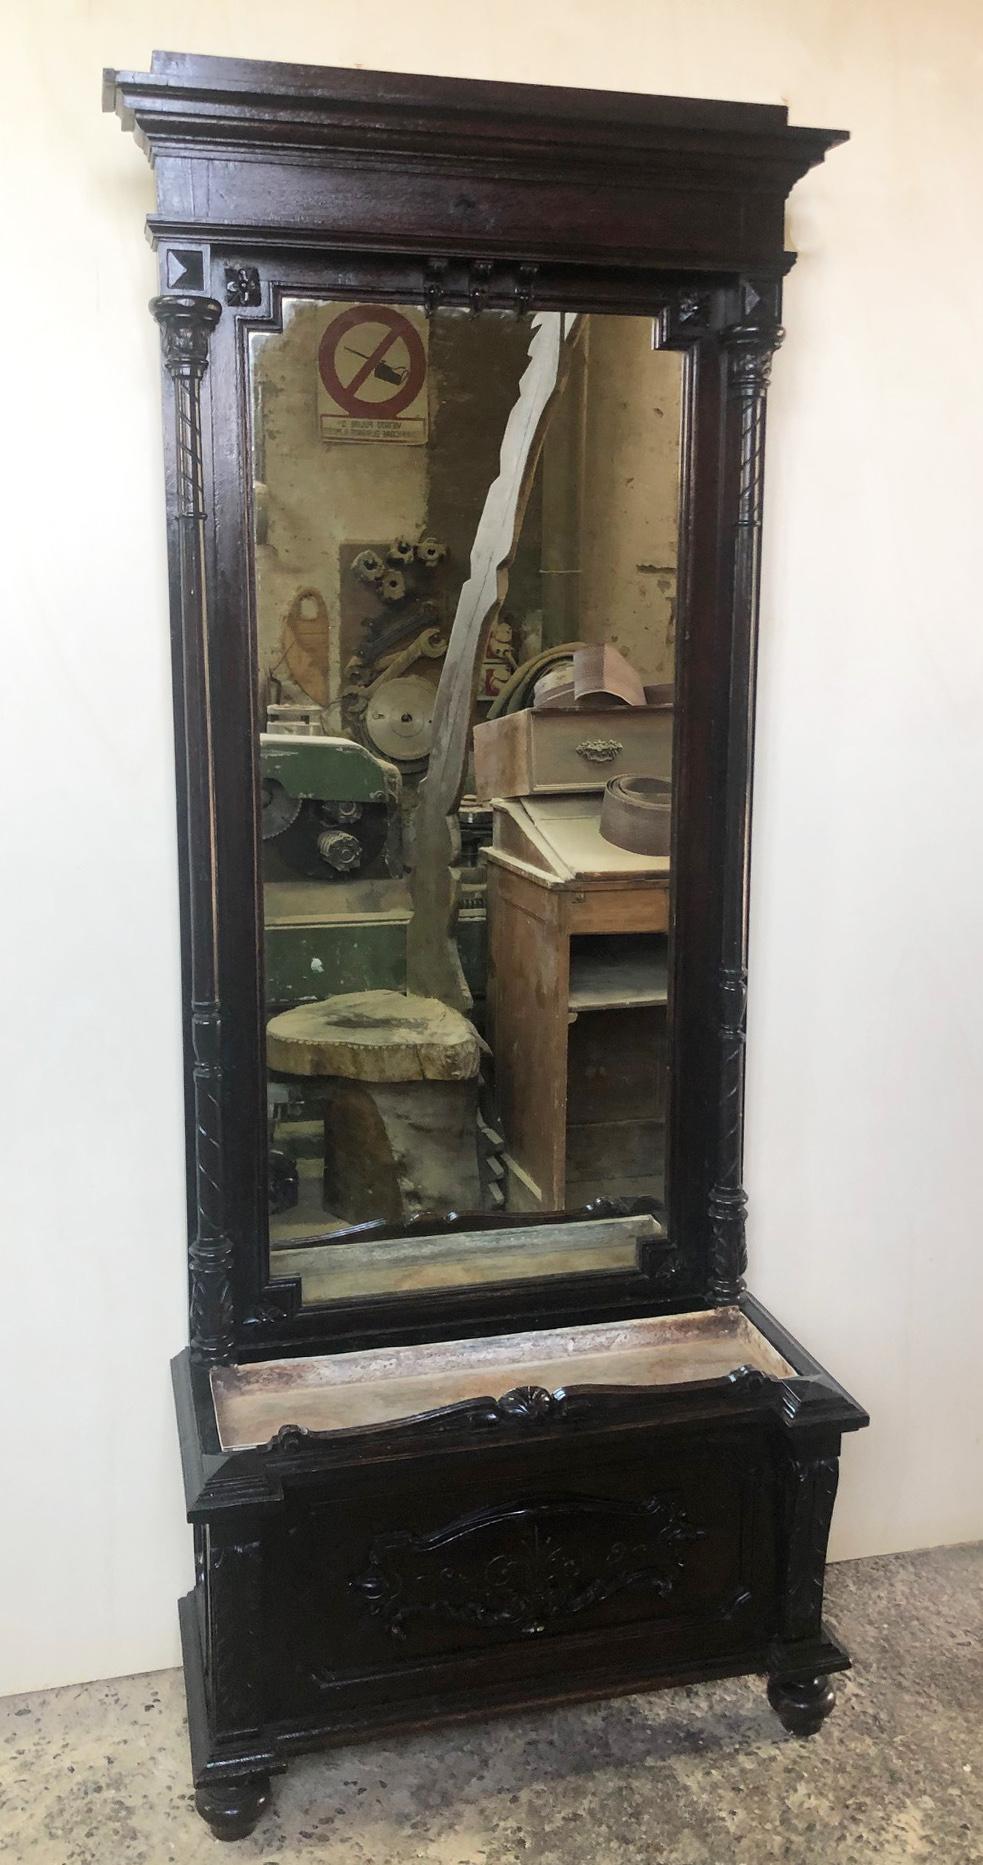 Rare Italian furniture from 1880, ebonized, with original mirror and carvings. Flower holder at the bottom.
The cabinet was at the entrance of a large Florentine country villa with a vase of flowers at the bottom.
The paint is original in patina,